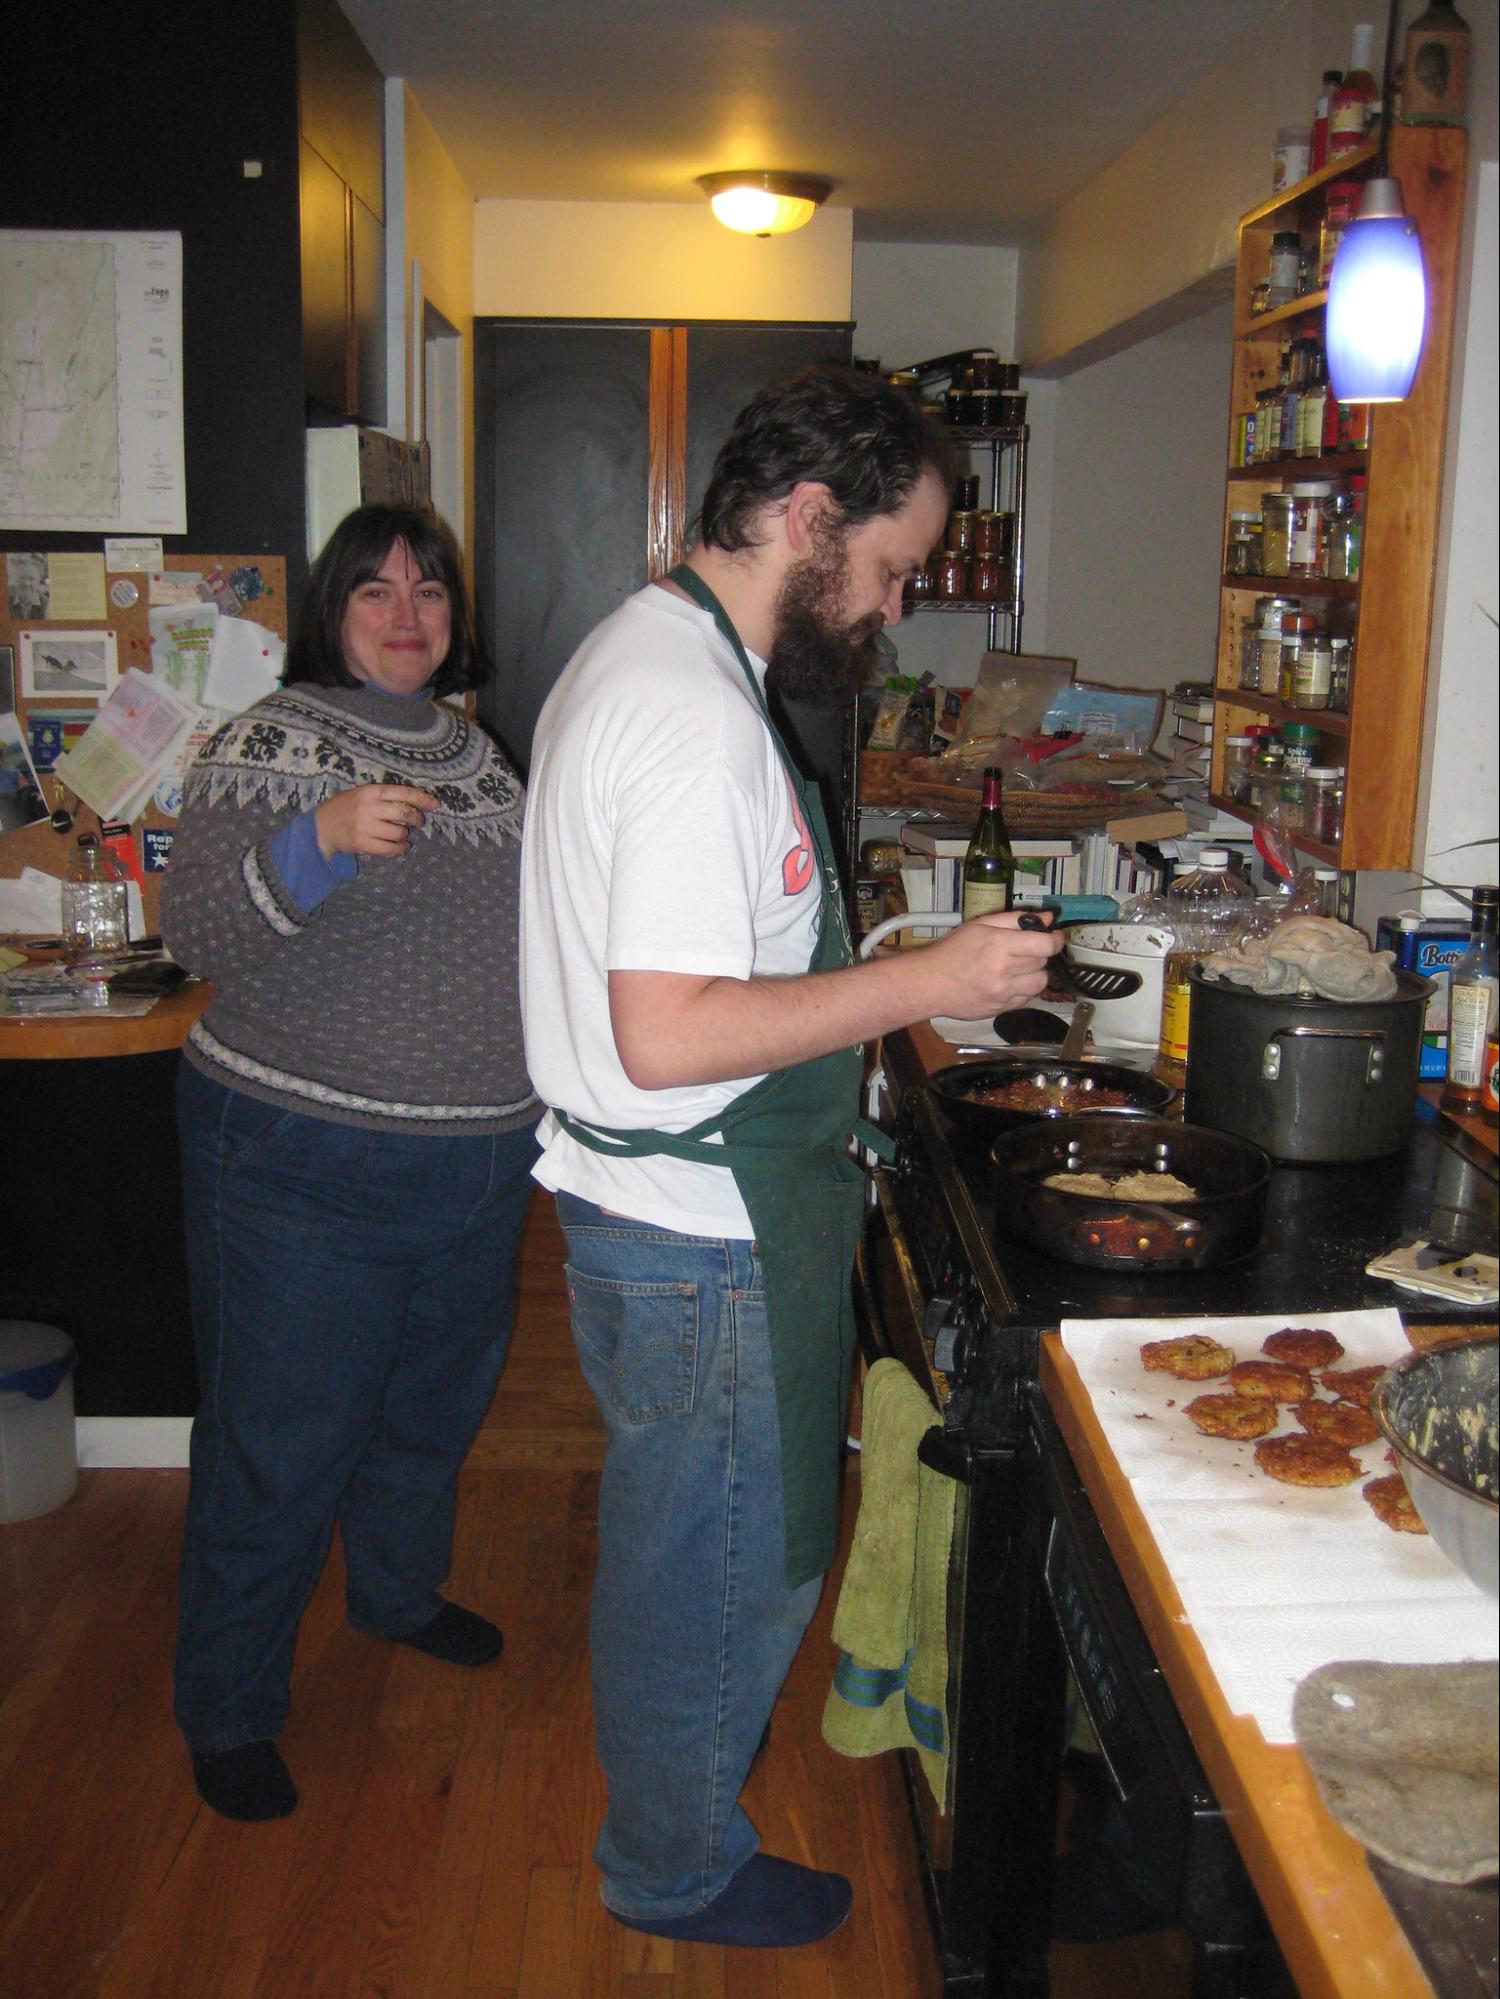 A man in an apron prepares latkes while a woman smiles and looks on